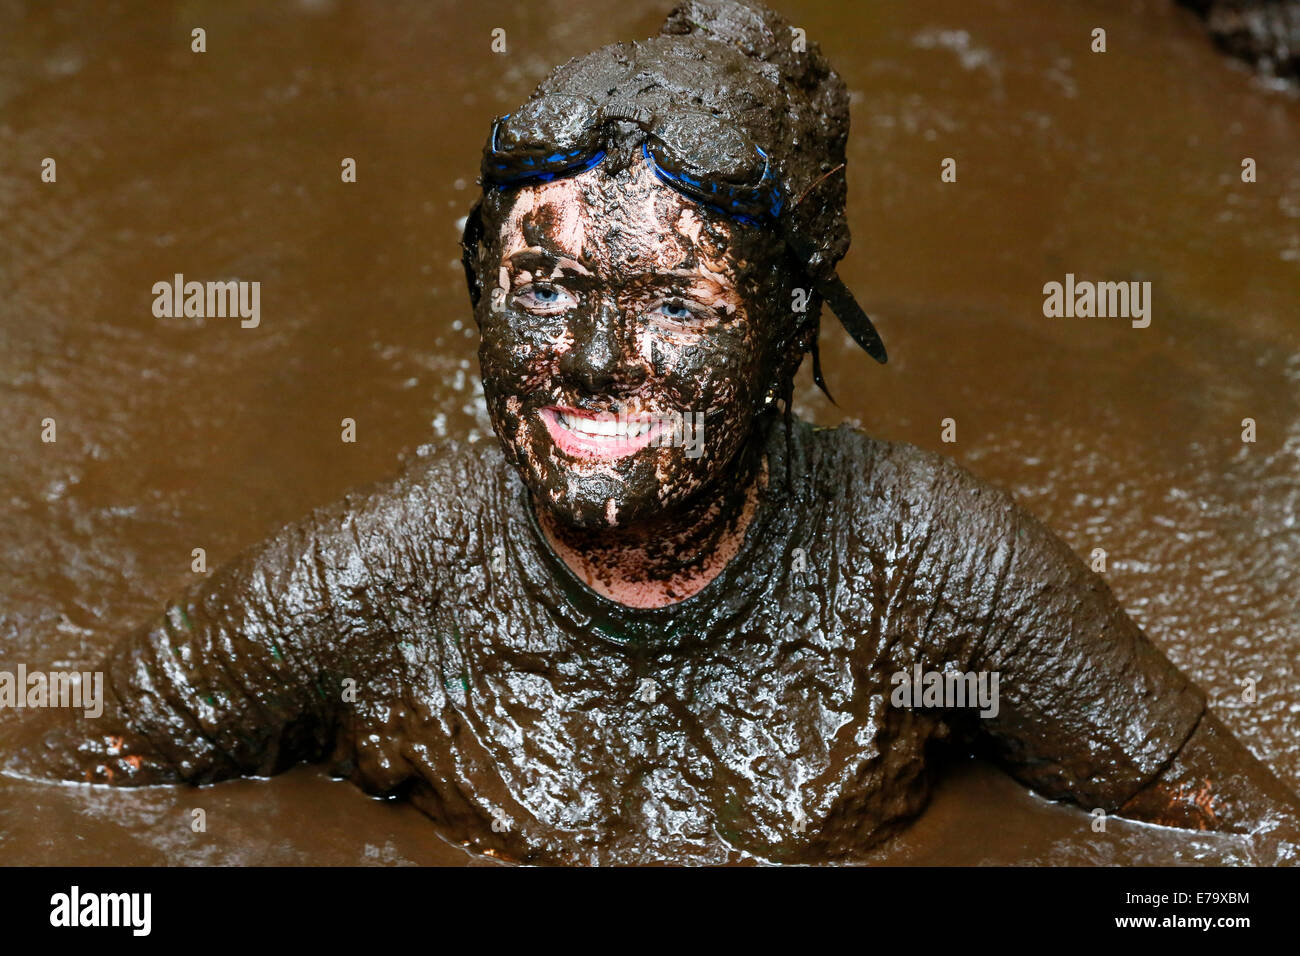 Mud Run High Resolution Stock Photography and Images - Alamy